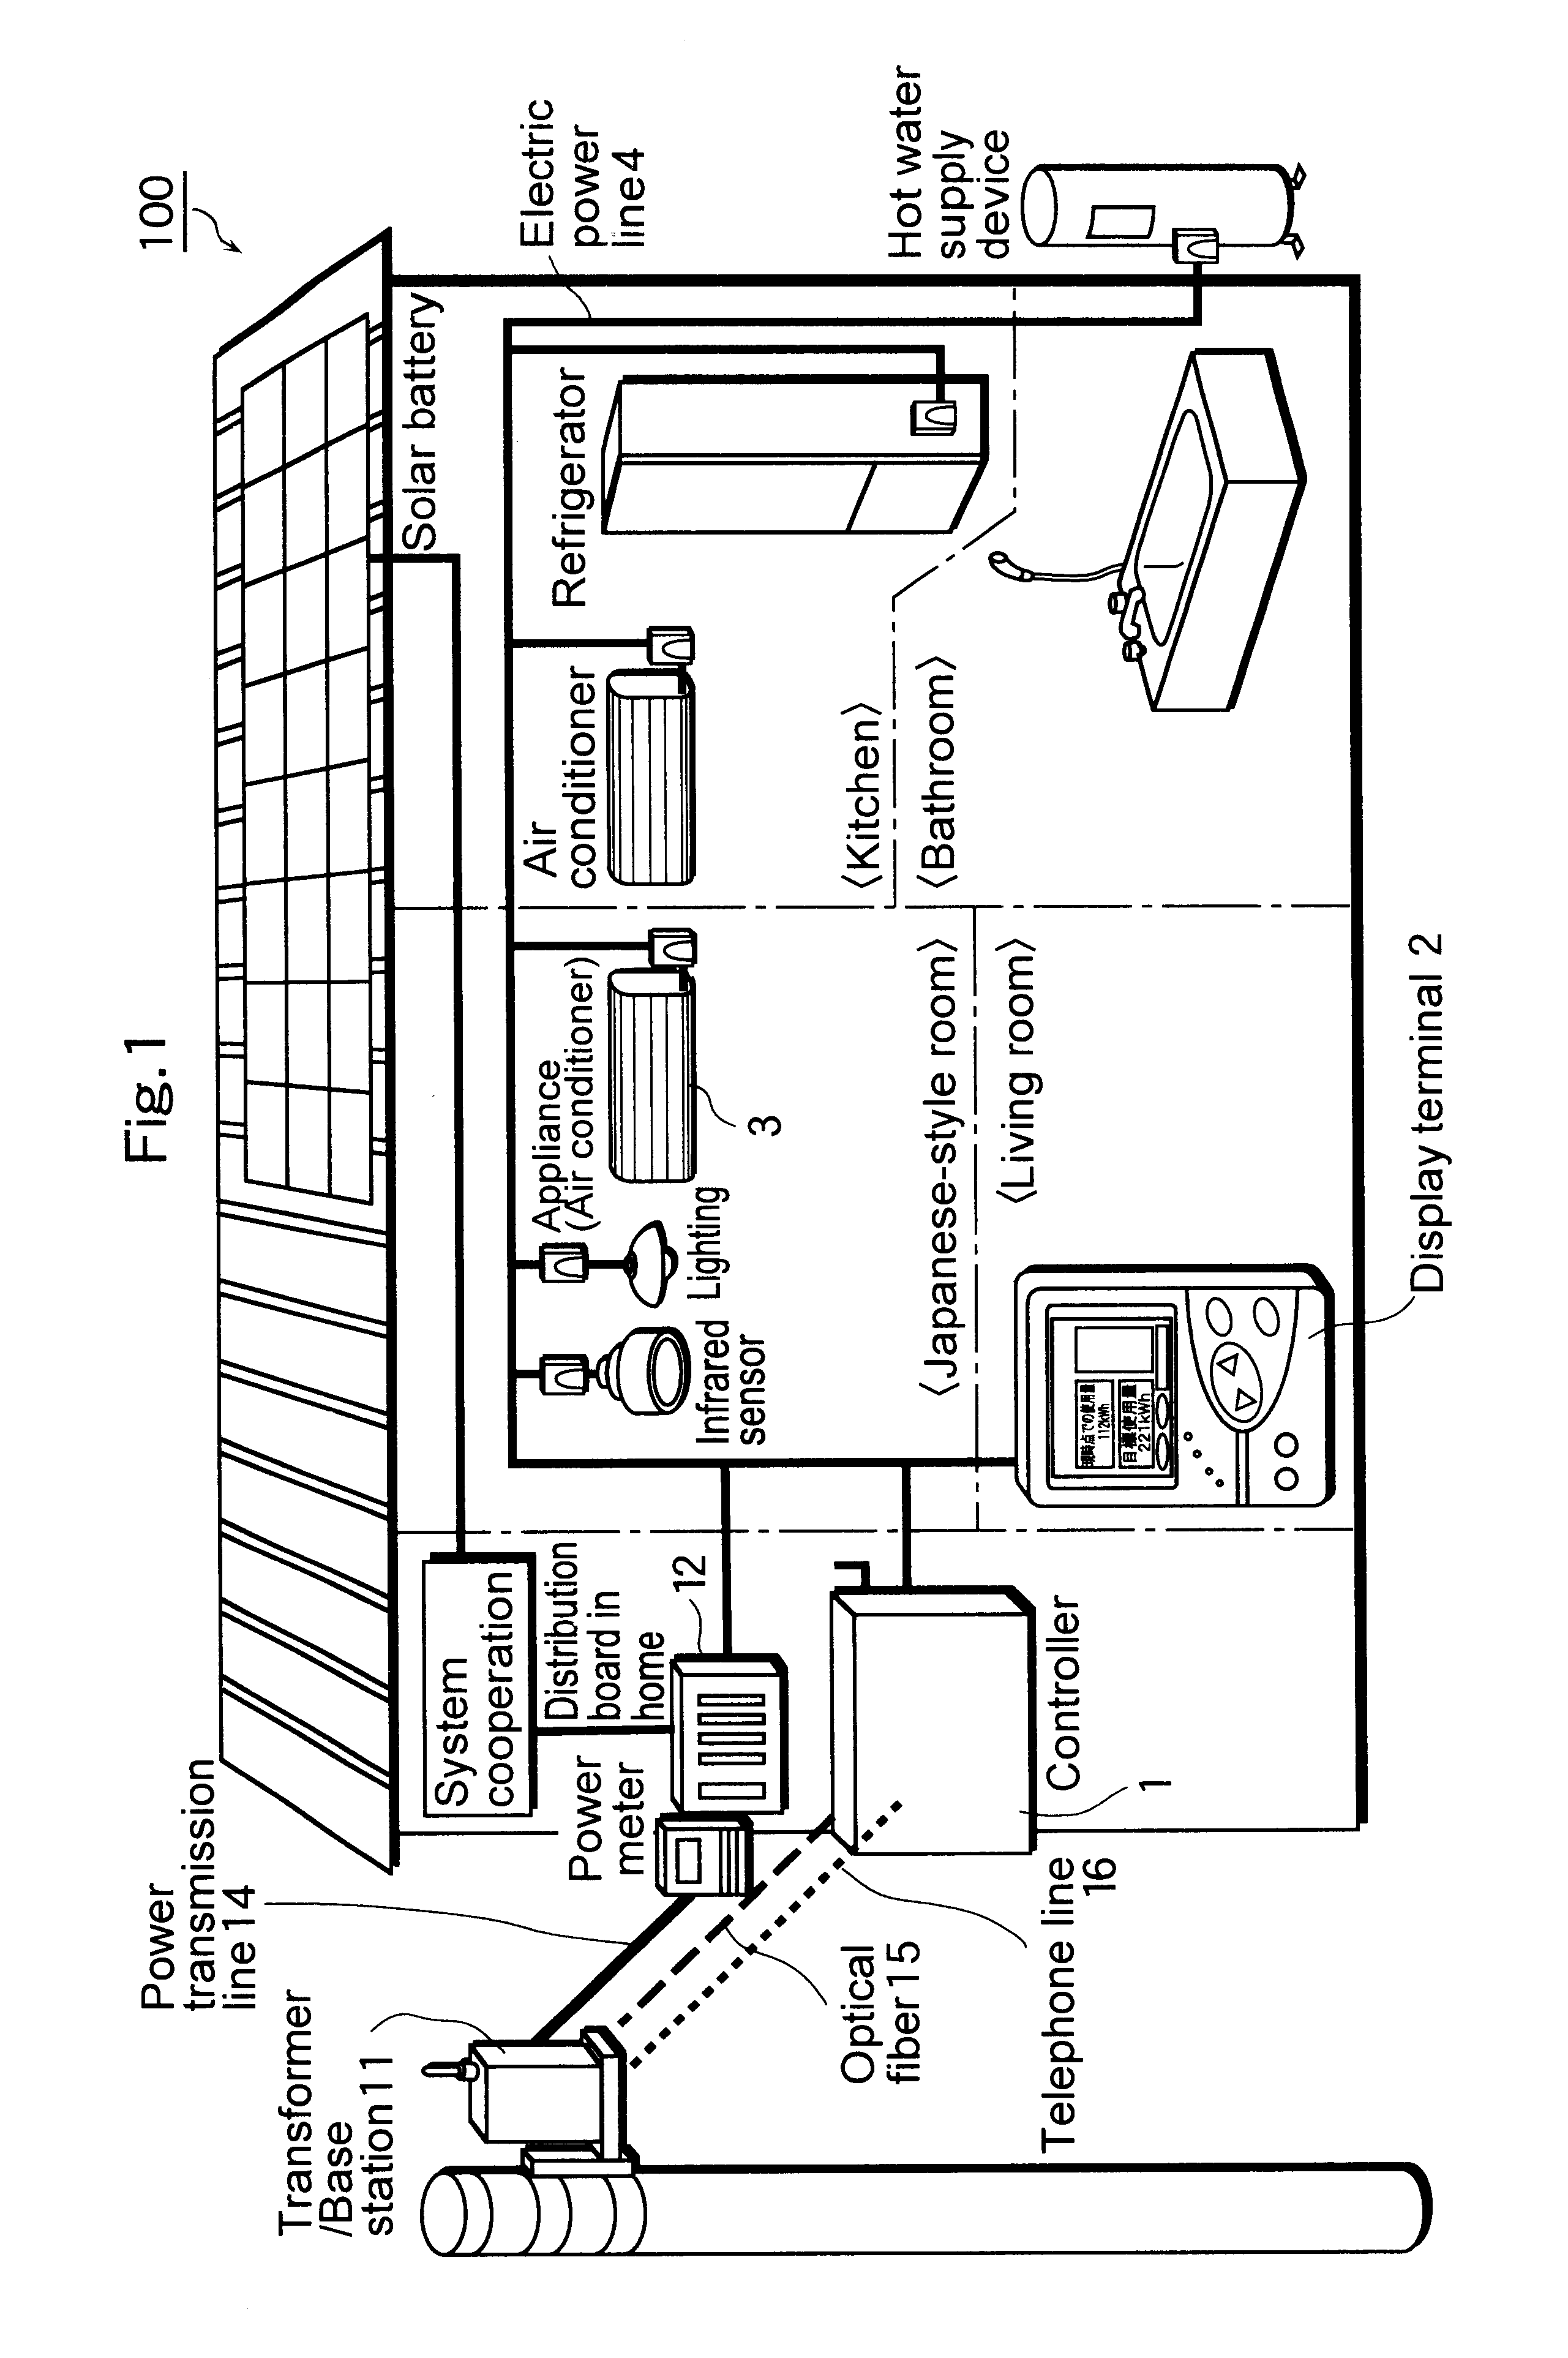 Appliance data collecting system